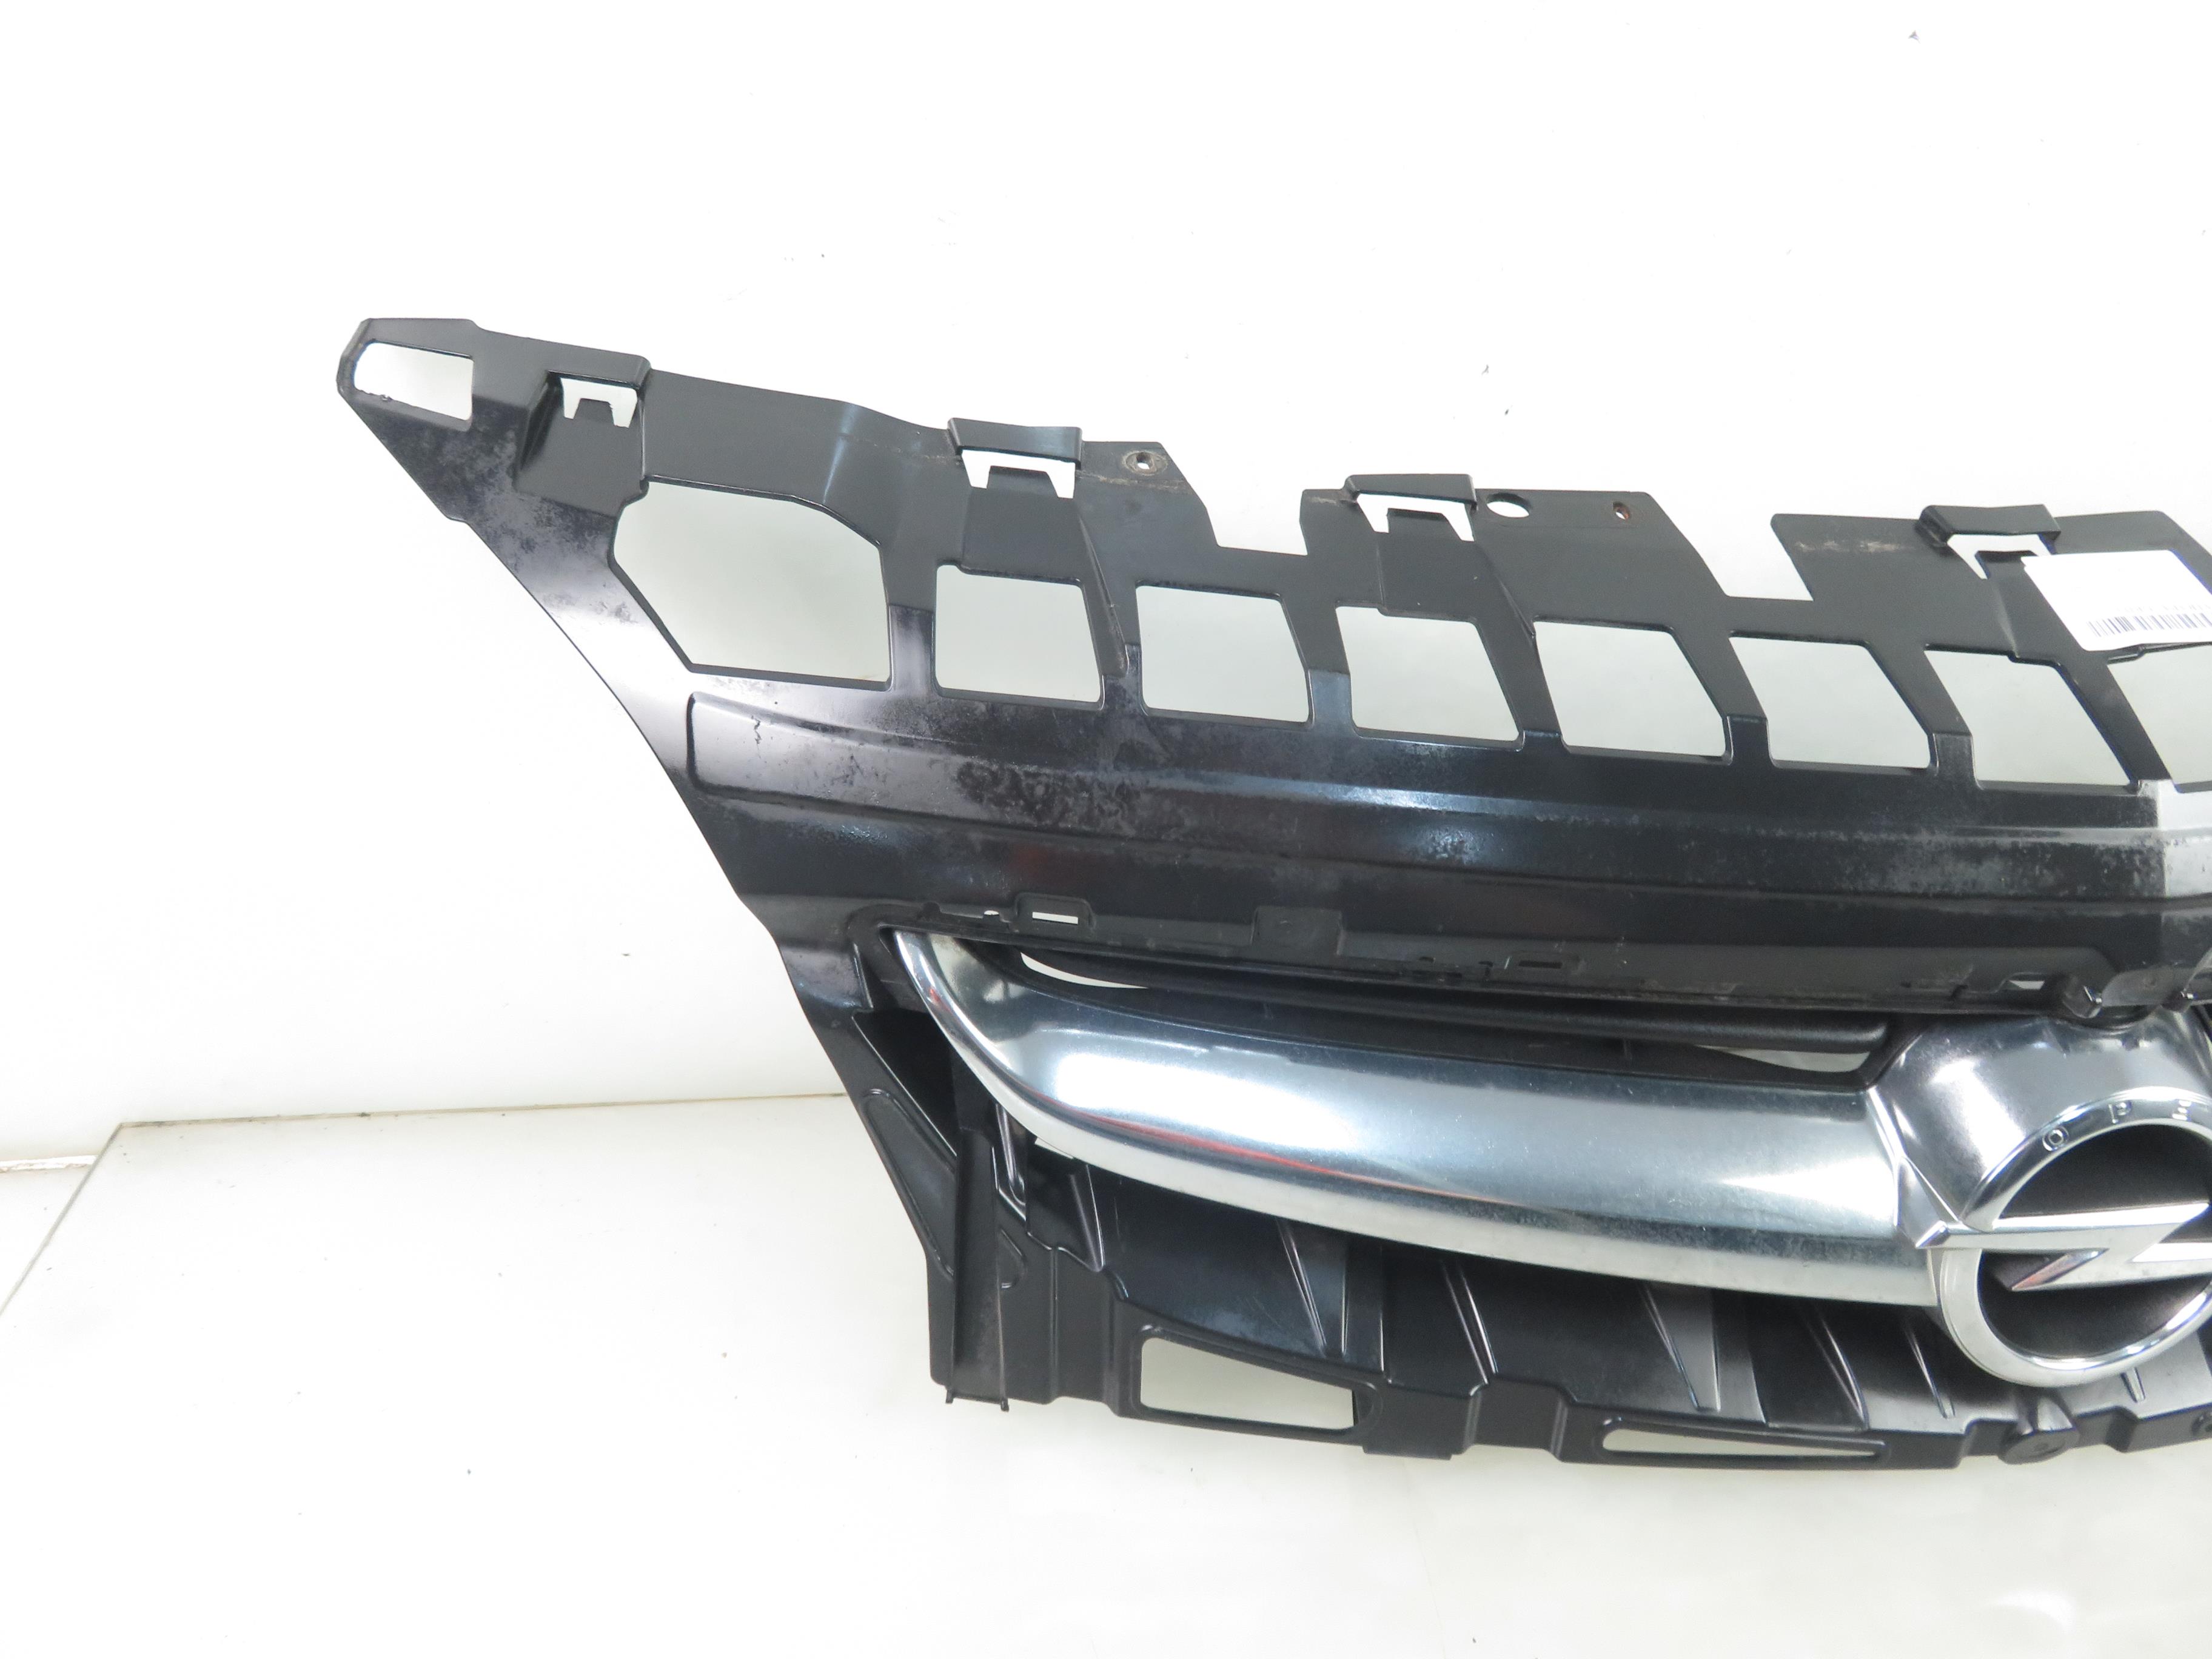 OPEL Astra J (2009-2020) Grilles 13368851 25203883